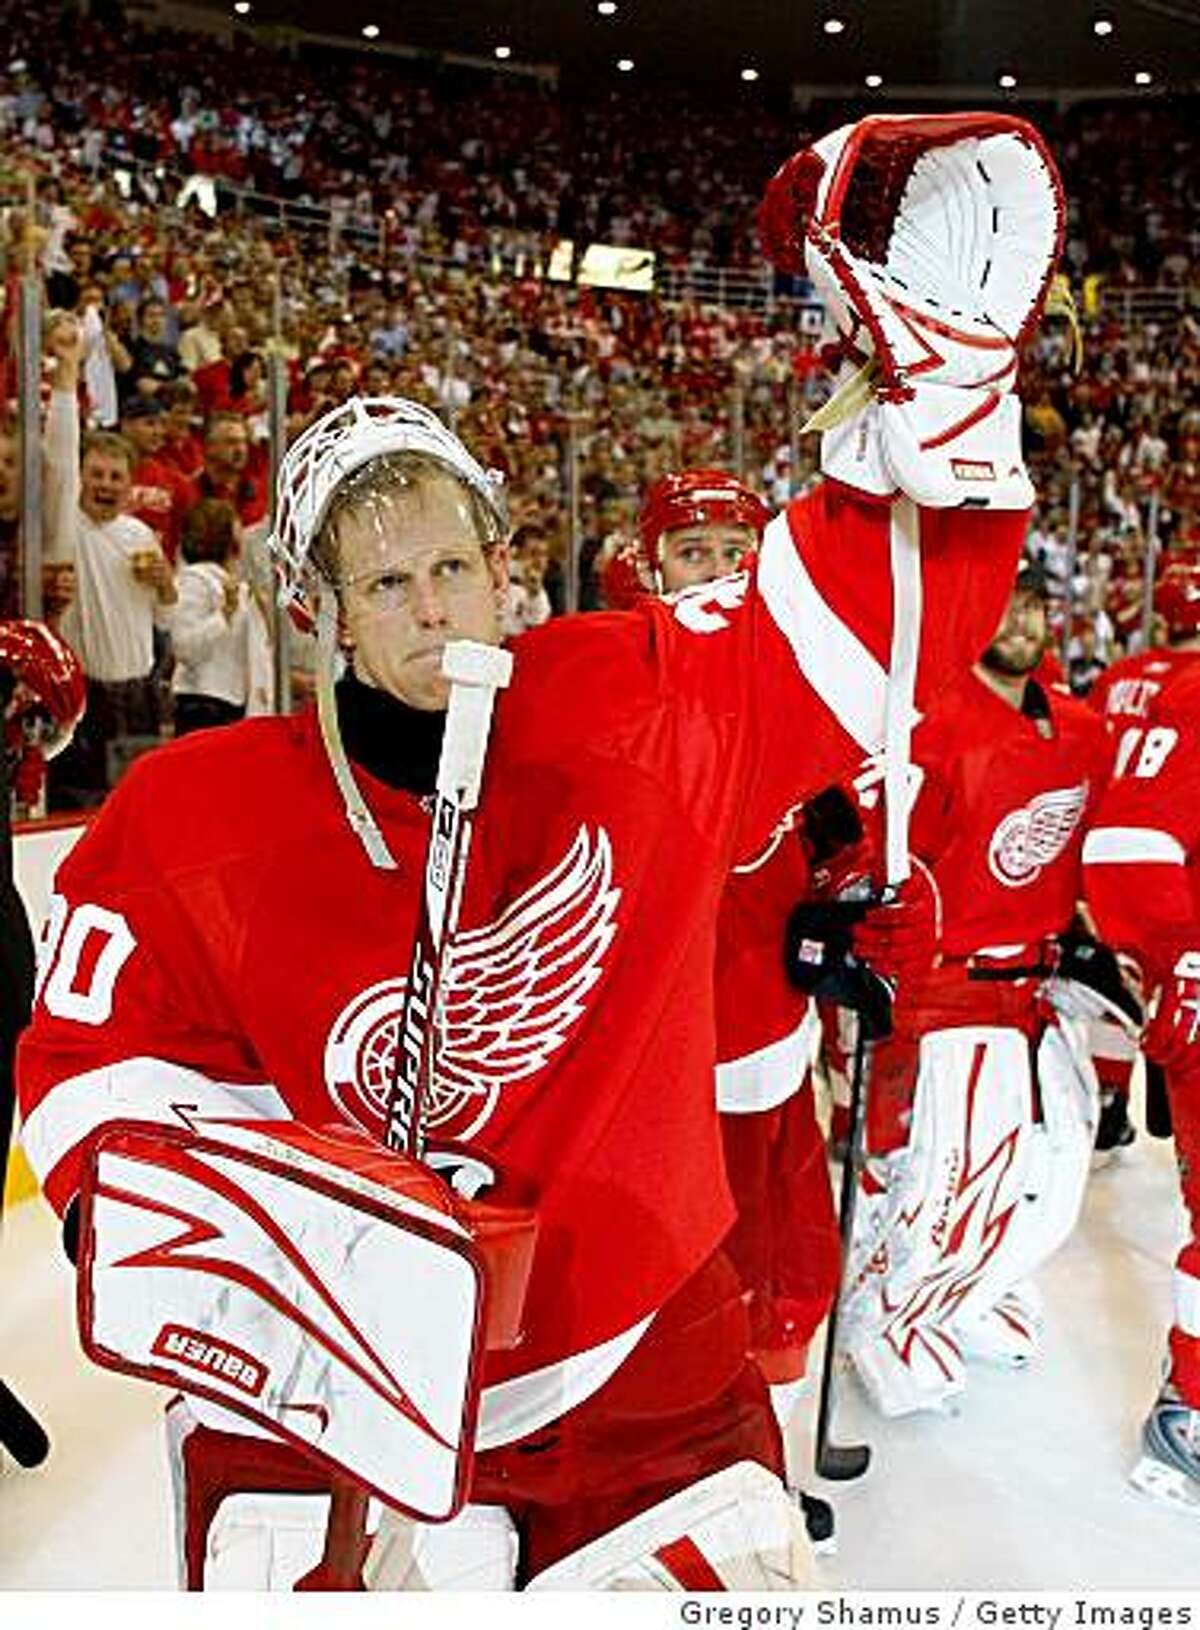 Detroit Red Wings Goalie Chris Osgood, 2009 Nhl Stanley Cup Sports